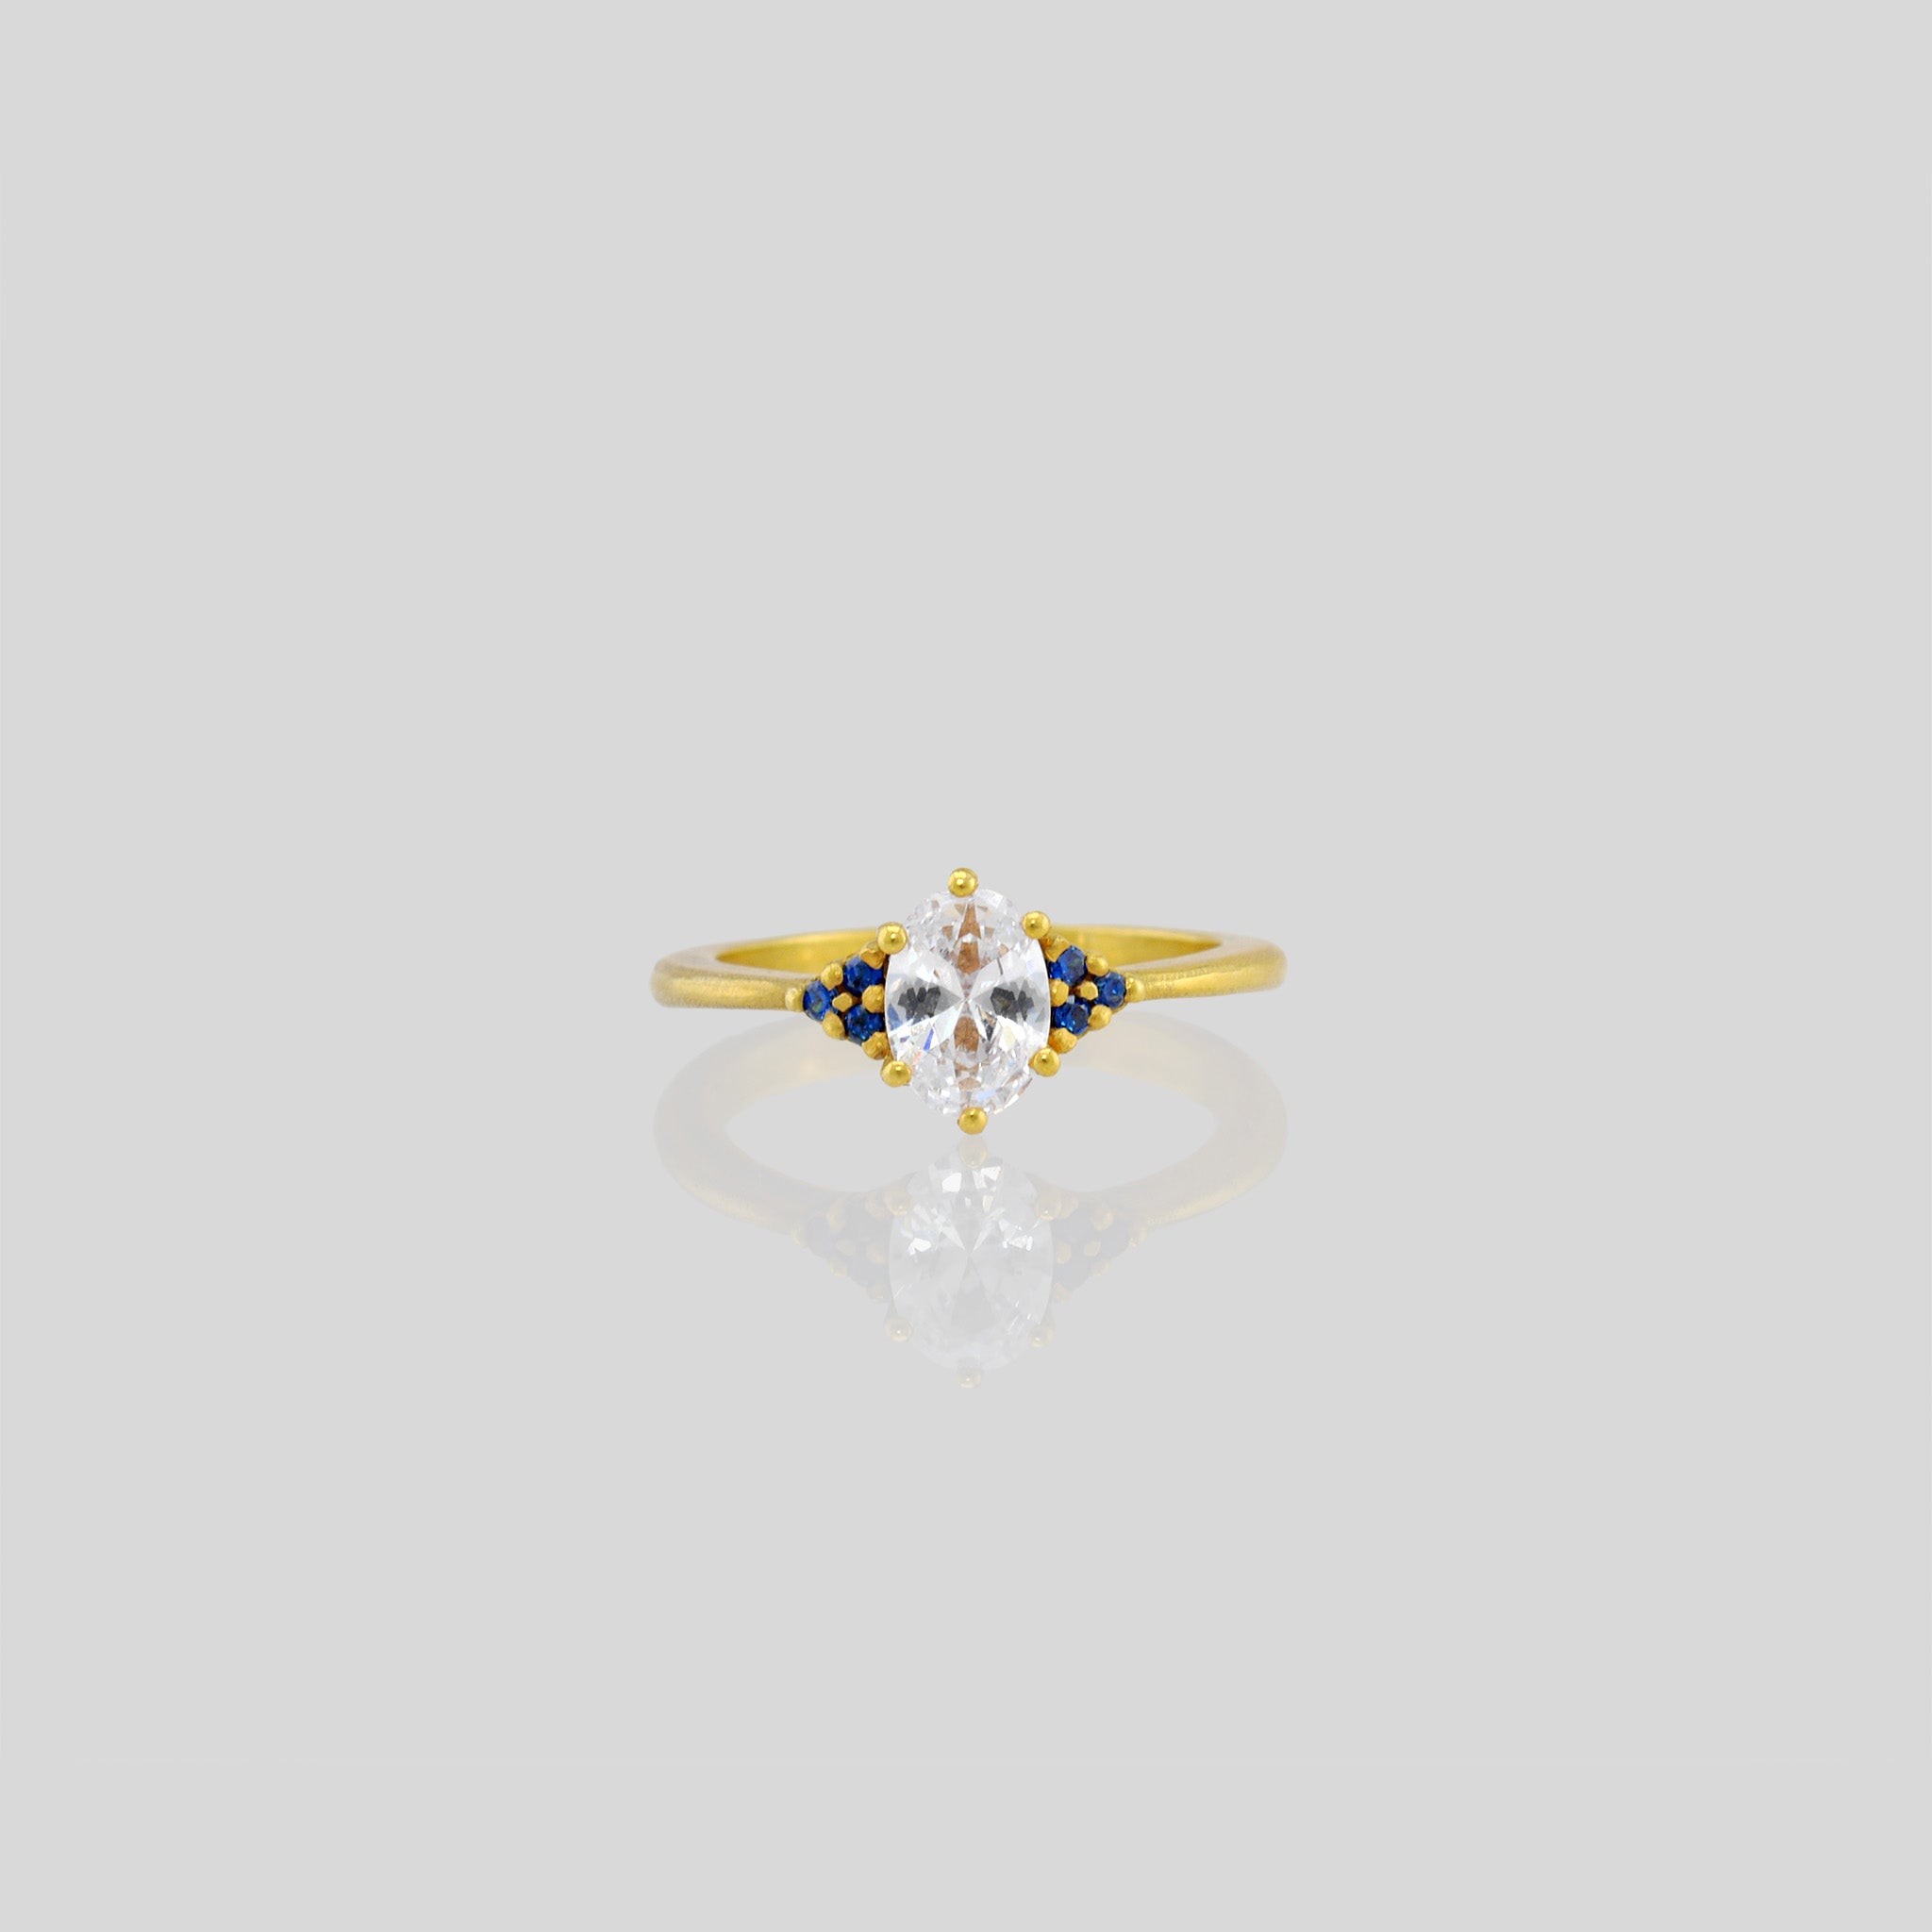 Front angle of our Gold engagement ring with oval central diamond and three tiny Sapphires on each side. Timeless elegance with a touch of color, perfect for an elegant proposal.